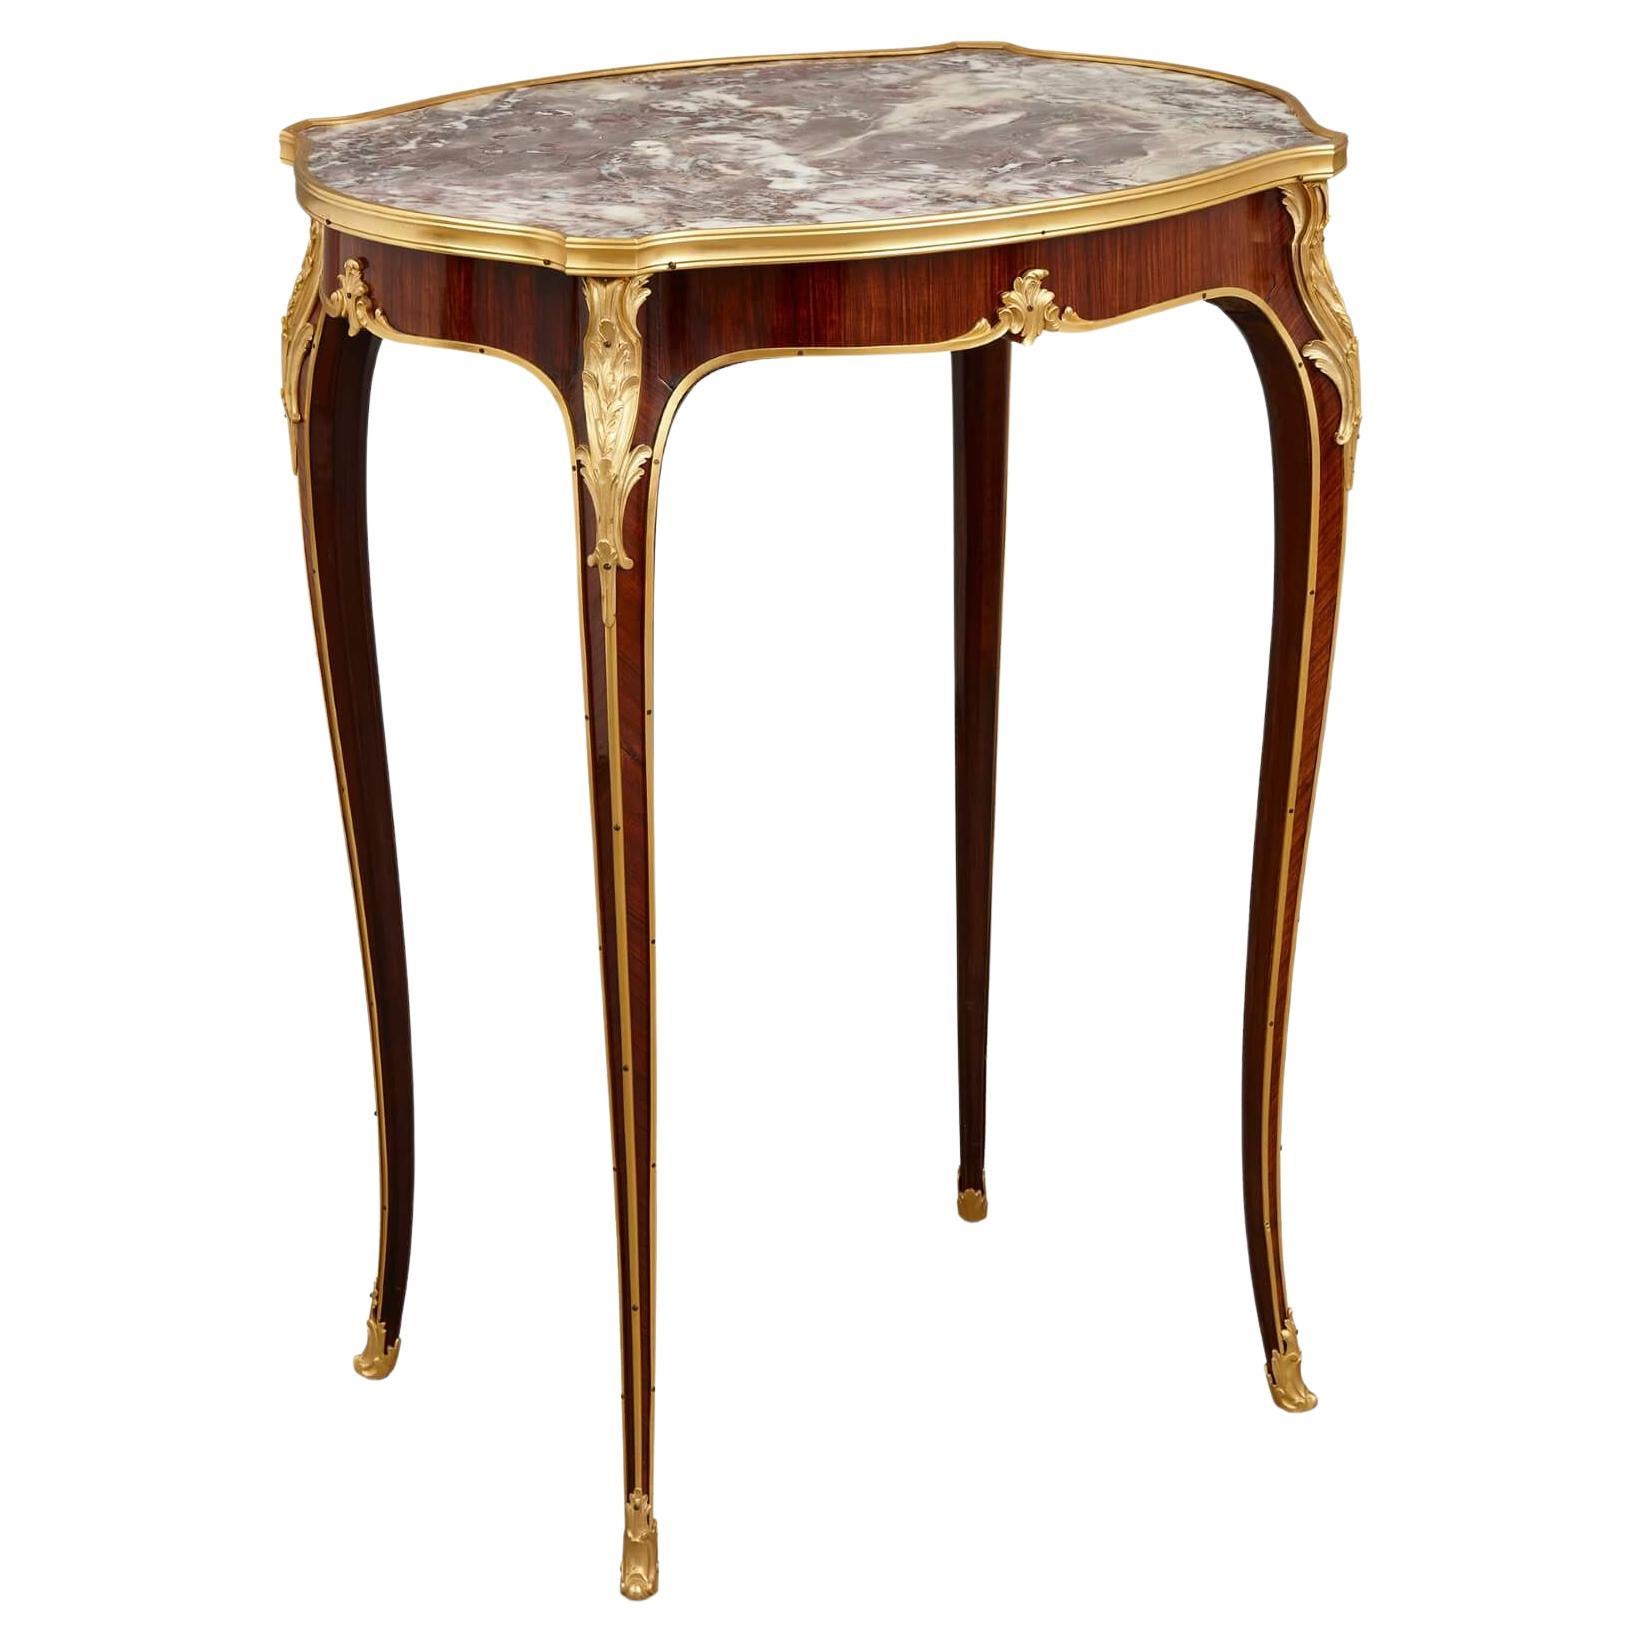 Louis XV Style Ormolu-Mounted Side Table with Marble Top Retailed by Deveraux